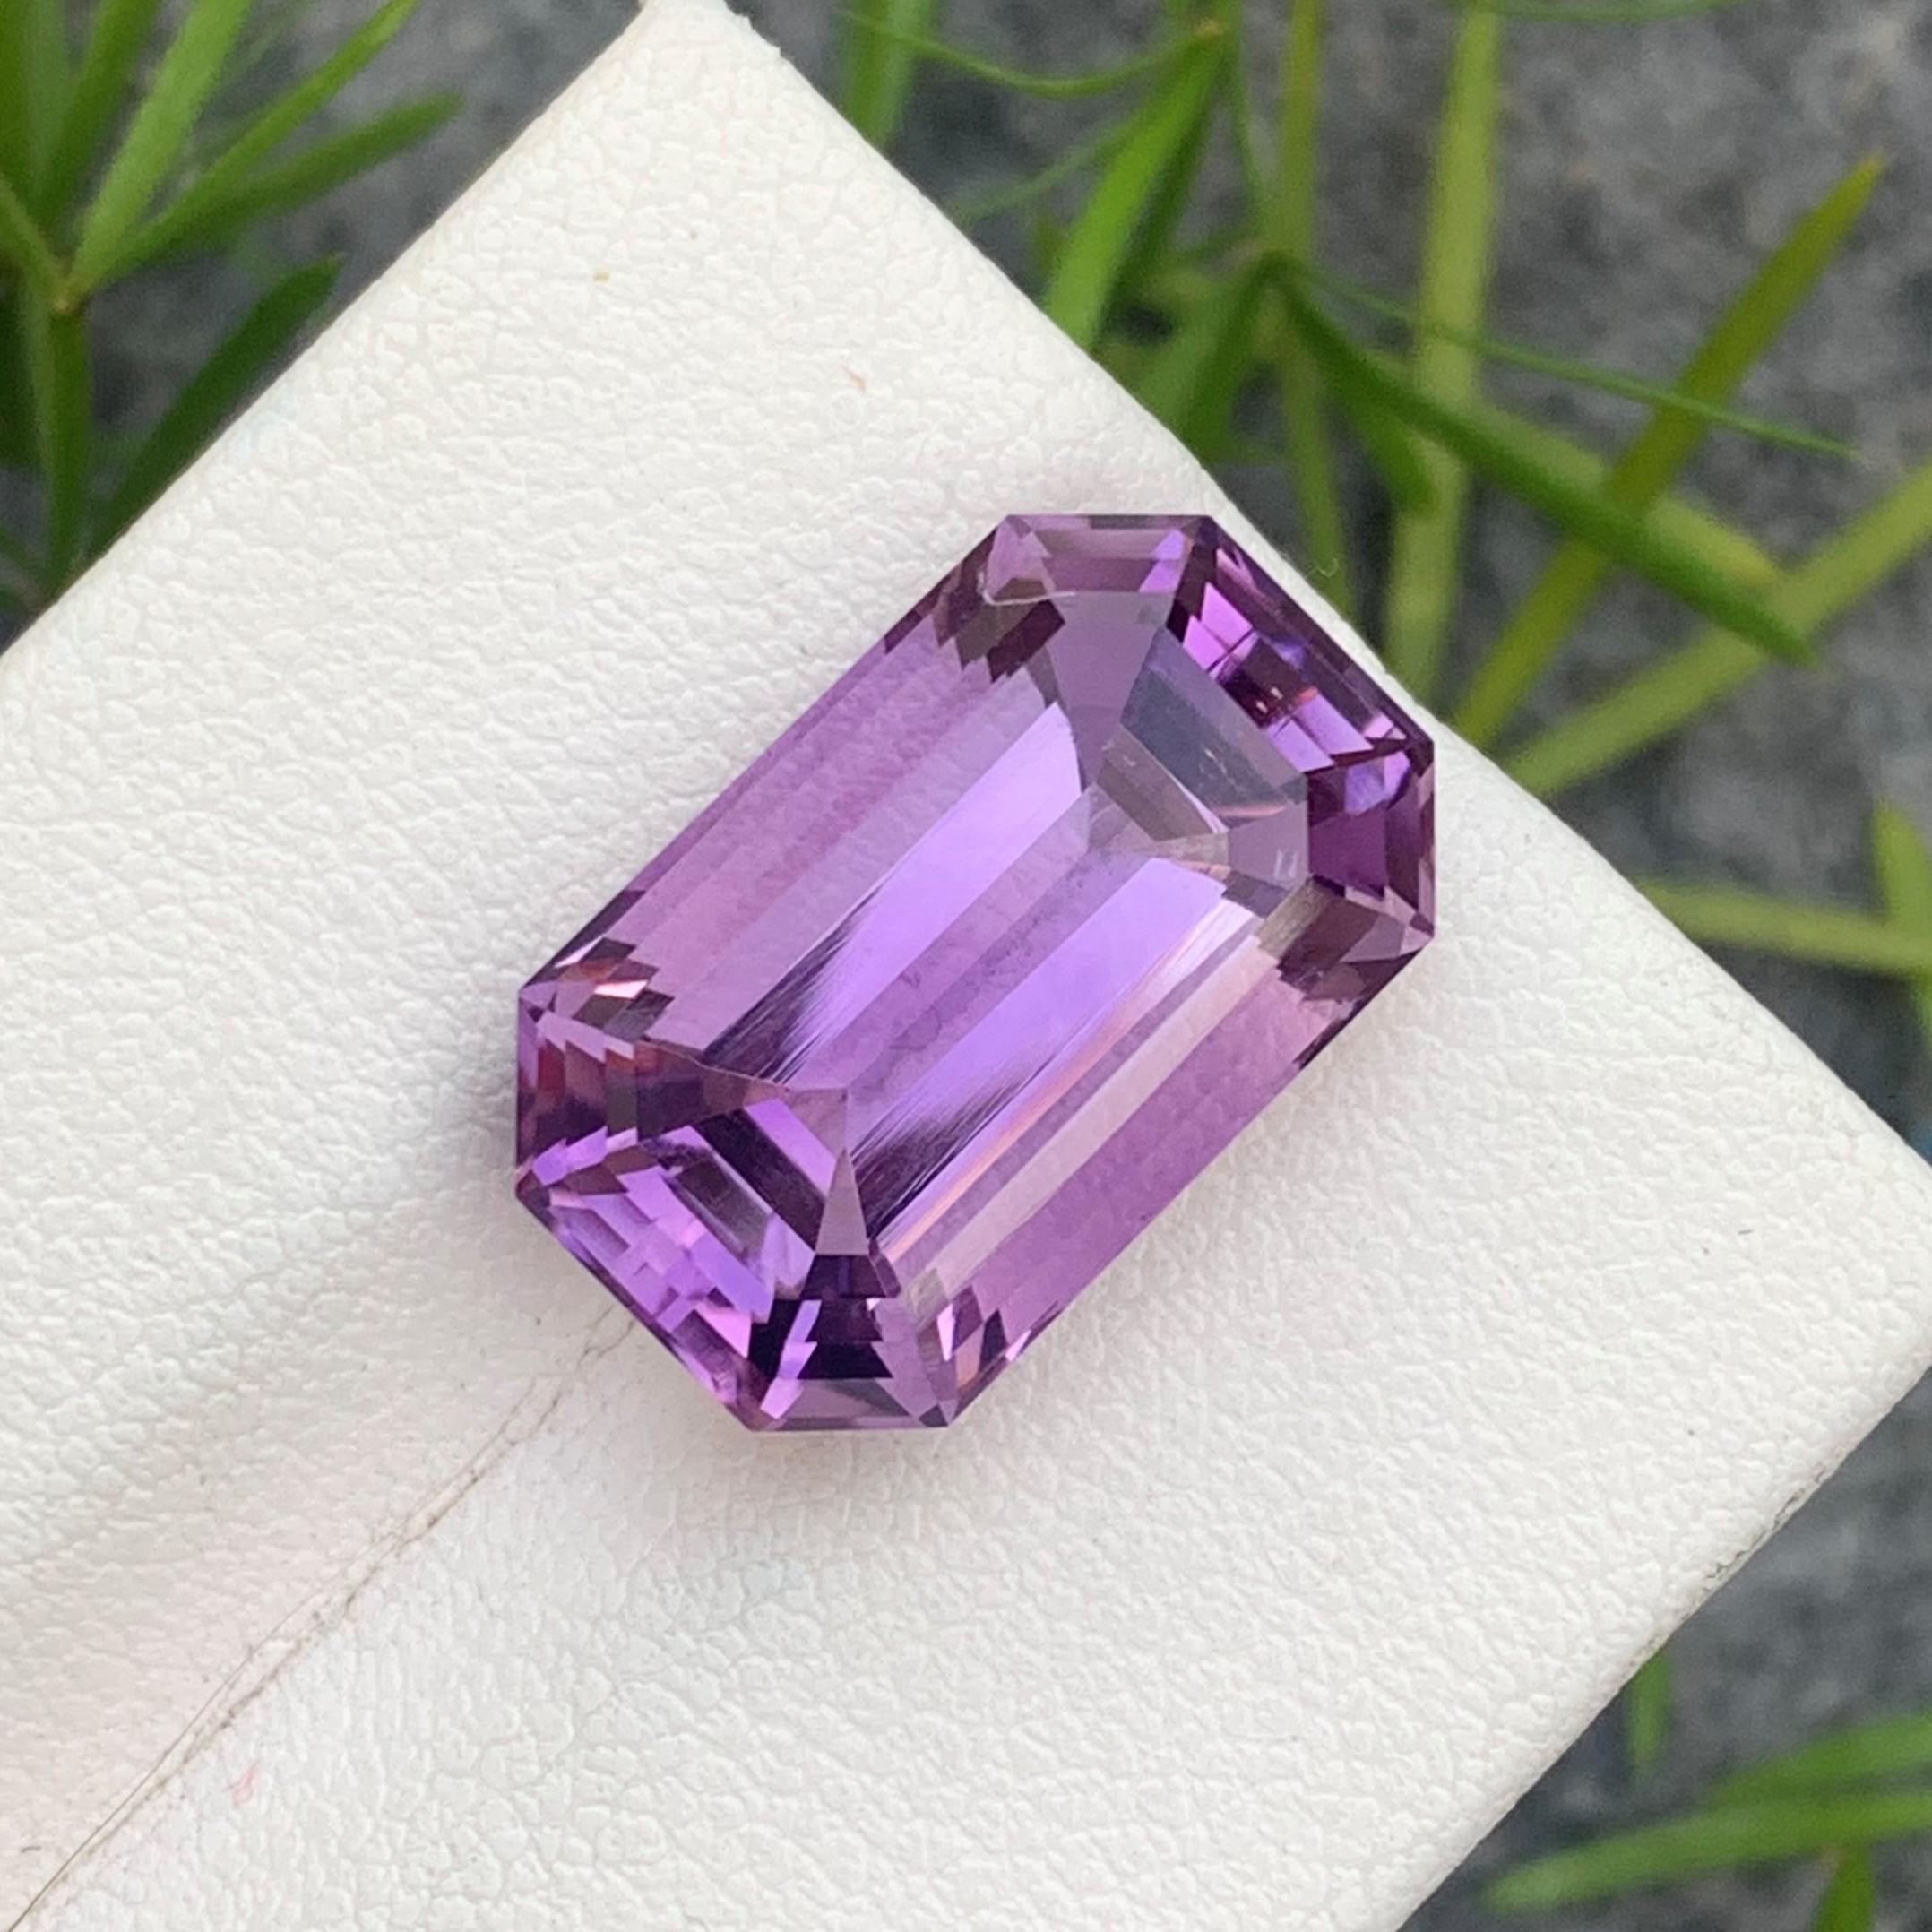 Gemstone Type : Amethyst
Weight : 10.65 Carats
Dimensions: 16.8x10.5x8.6 mm
Clarity : Clean
Origin : Brazil
Color: Purple
Shape: Emerald
Facet: Oval
Certificate: On Demand
Month: February
.
Purported amethyst powers for healing
enhancing the immune